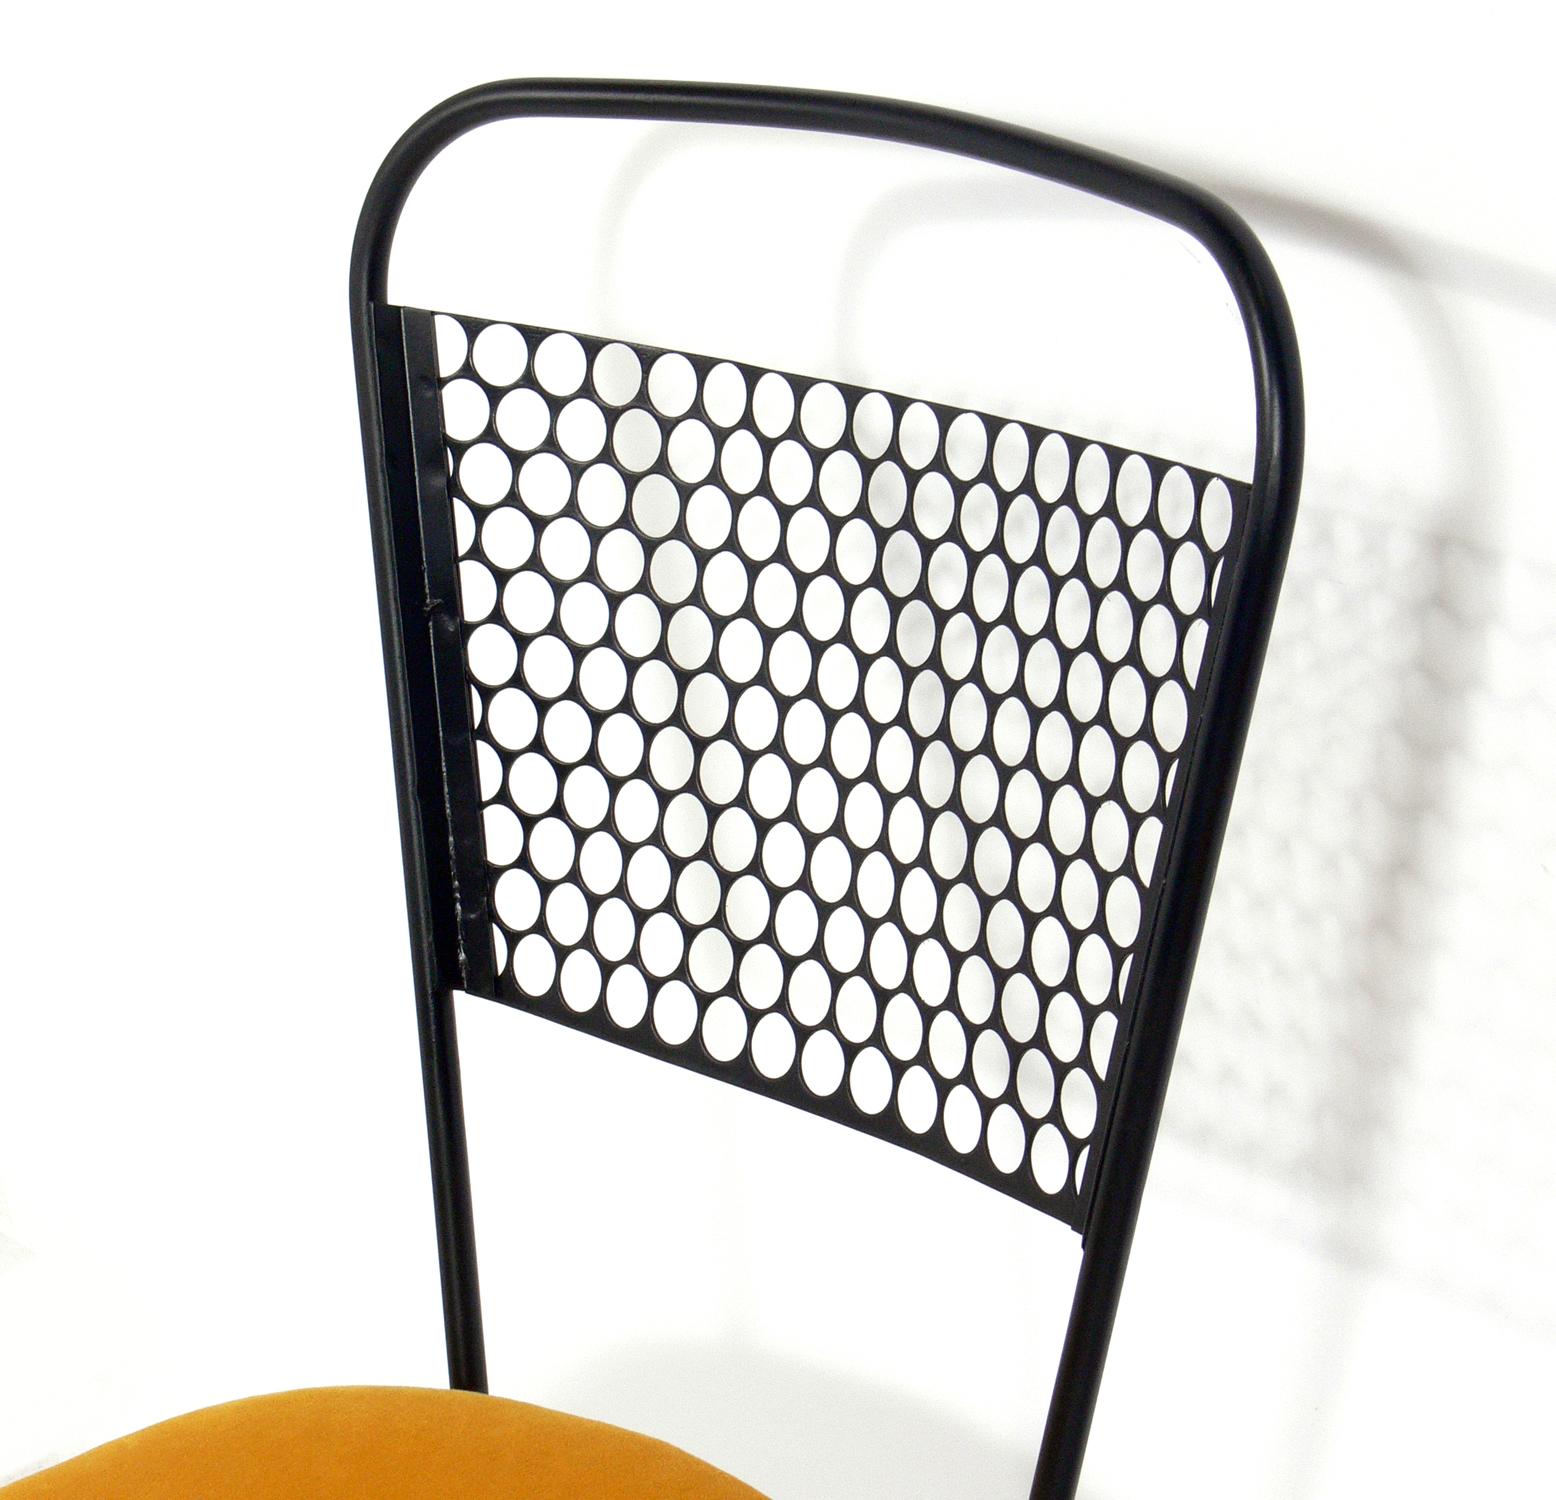 Perforated iron midcentury dining chairs, attributed to Mathieu Matégot, France, circa 1950s. They have been repainted and reupholstered in a goldenrod yellow velvet.